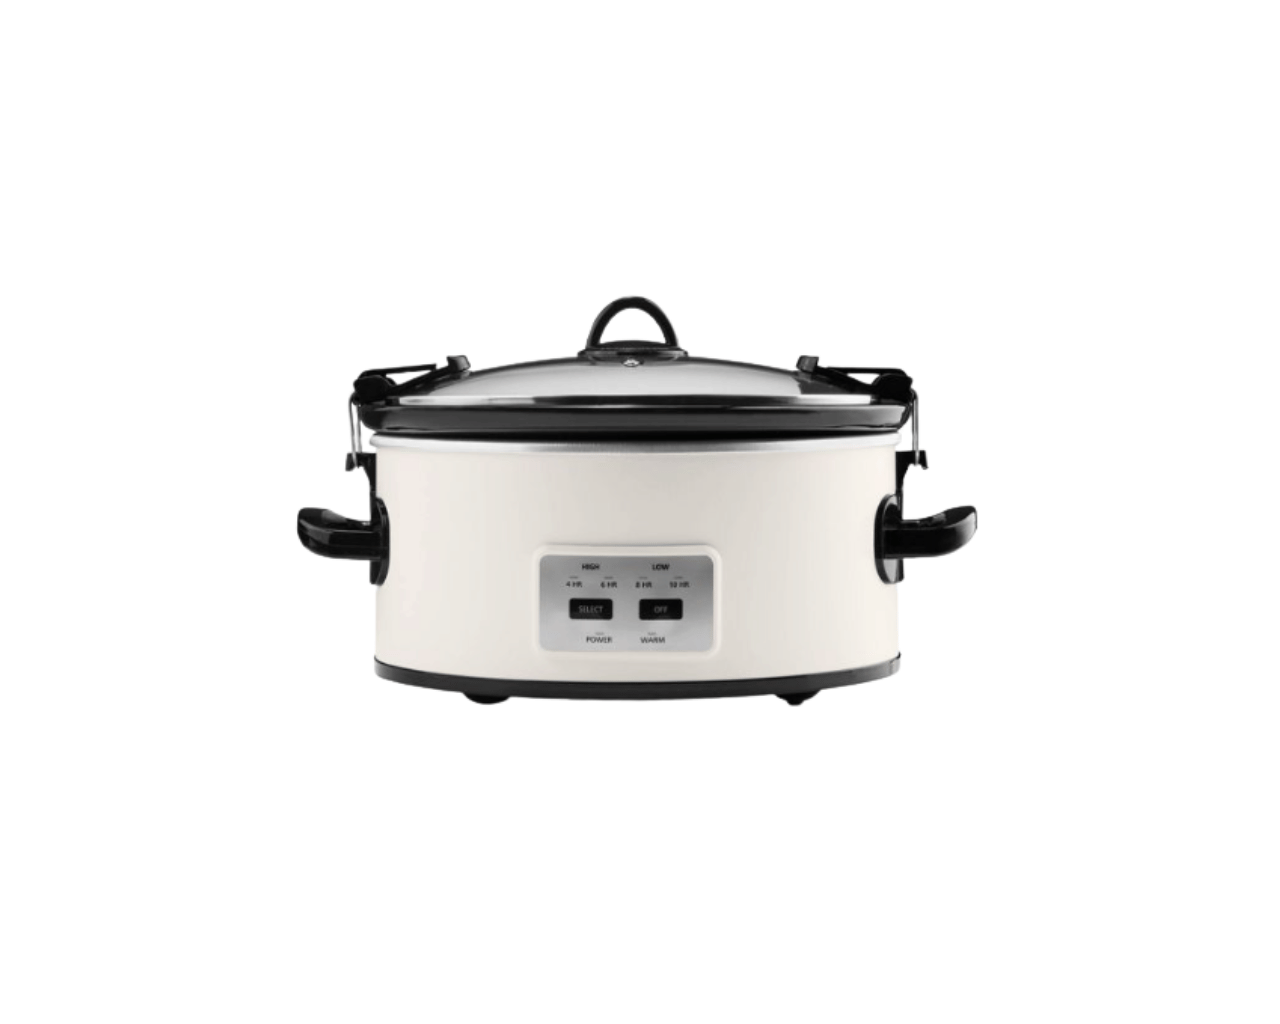 Crock-Pot NFL Cook and Carry Slow Cooker, 6 Qt. (Green Bay Packers